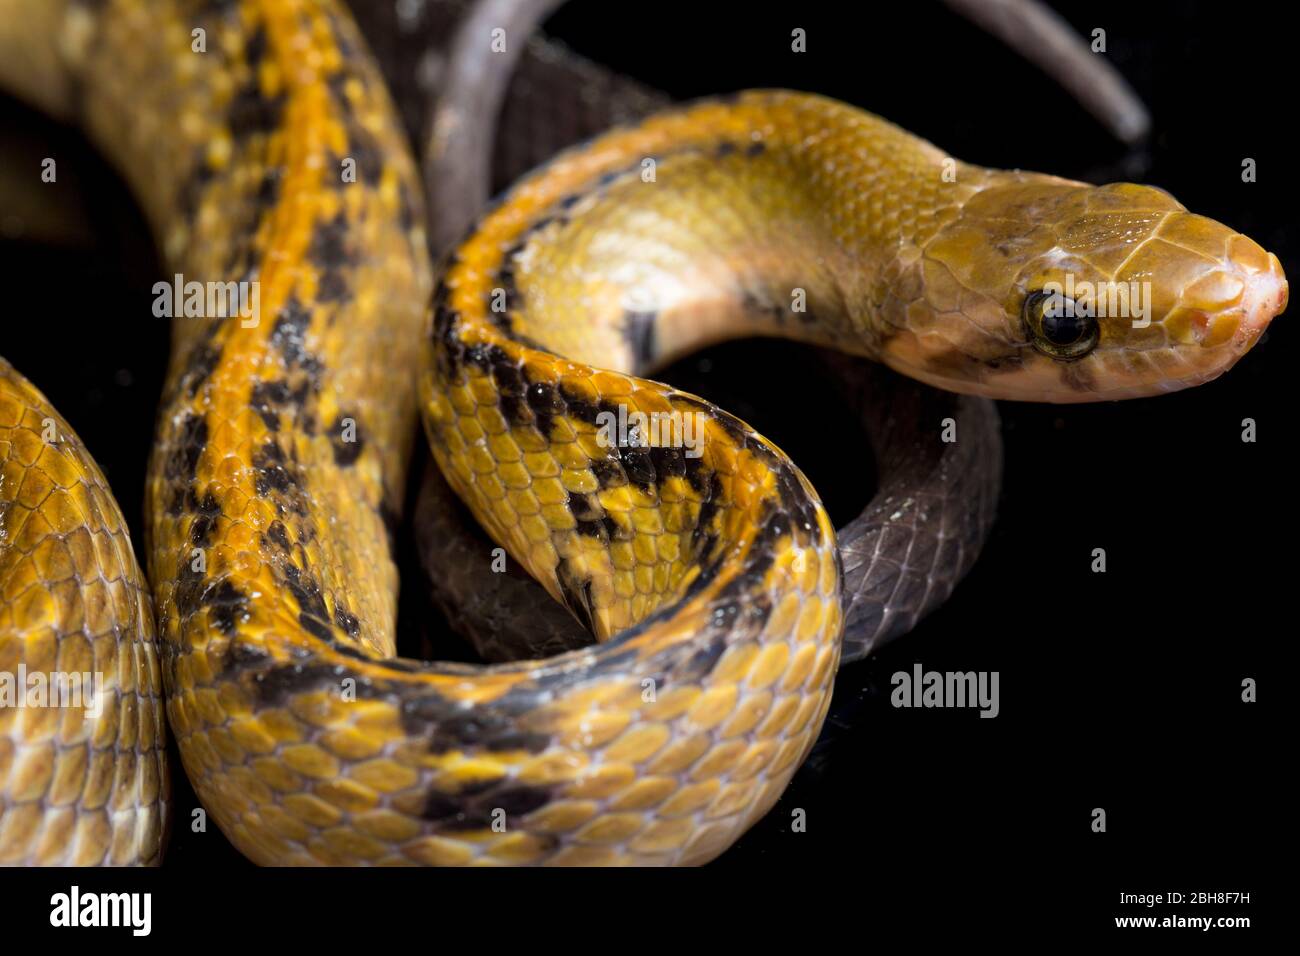 Coelognathus flavolineatus, the black copper rat snake or yellow striped snake,  isolated on black background Stock Photo